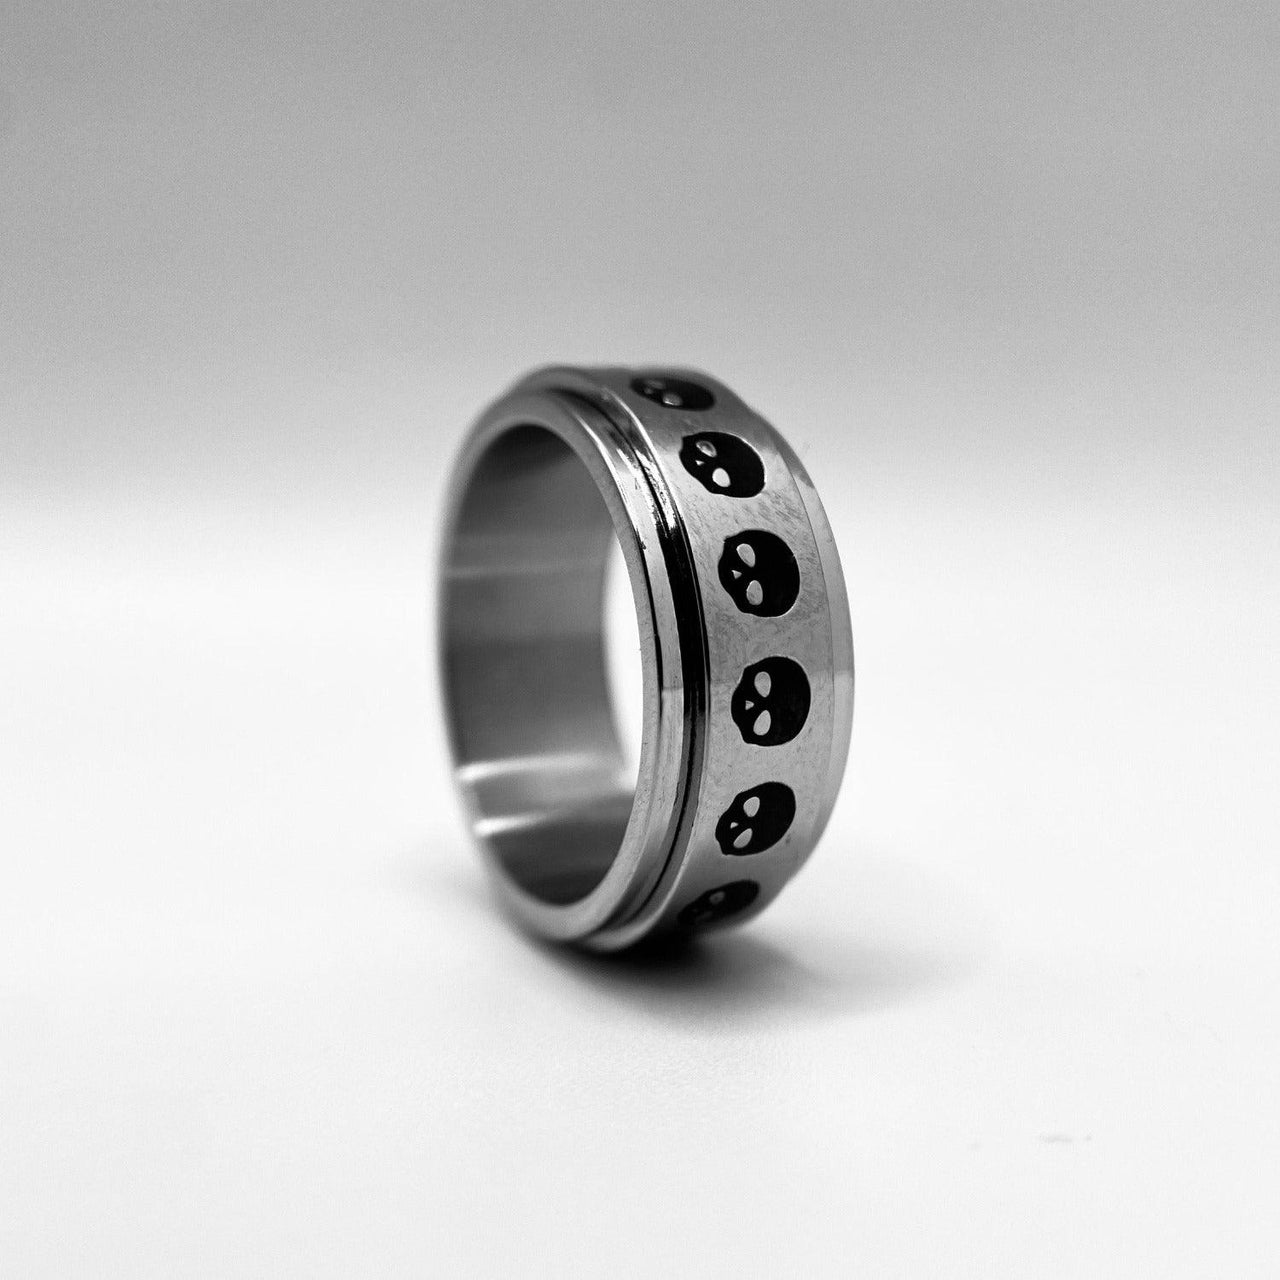 Stainless Steel Spinner Ring with skulls by Black Feather Design